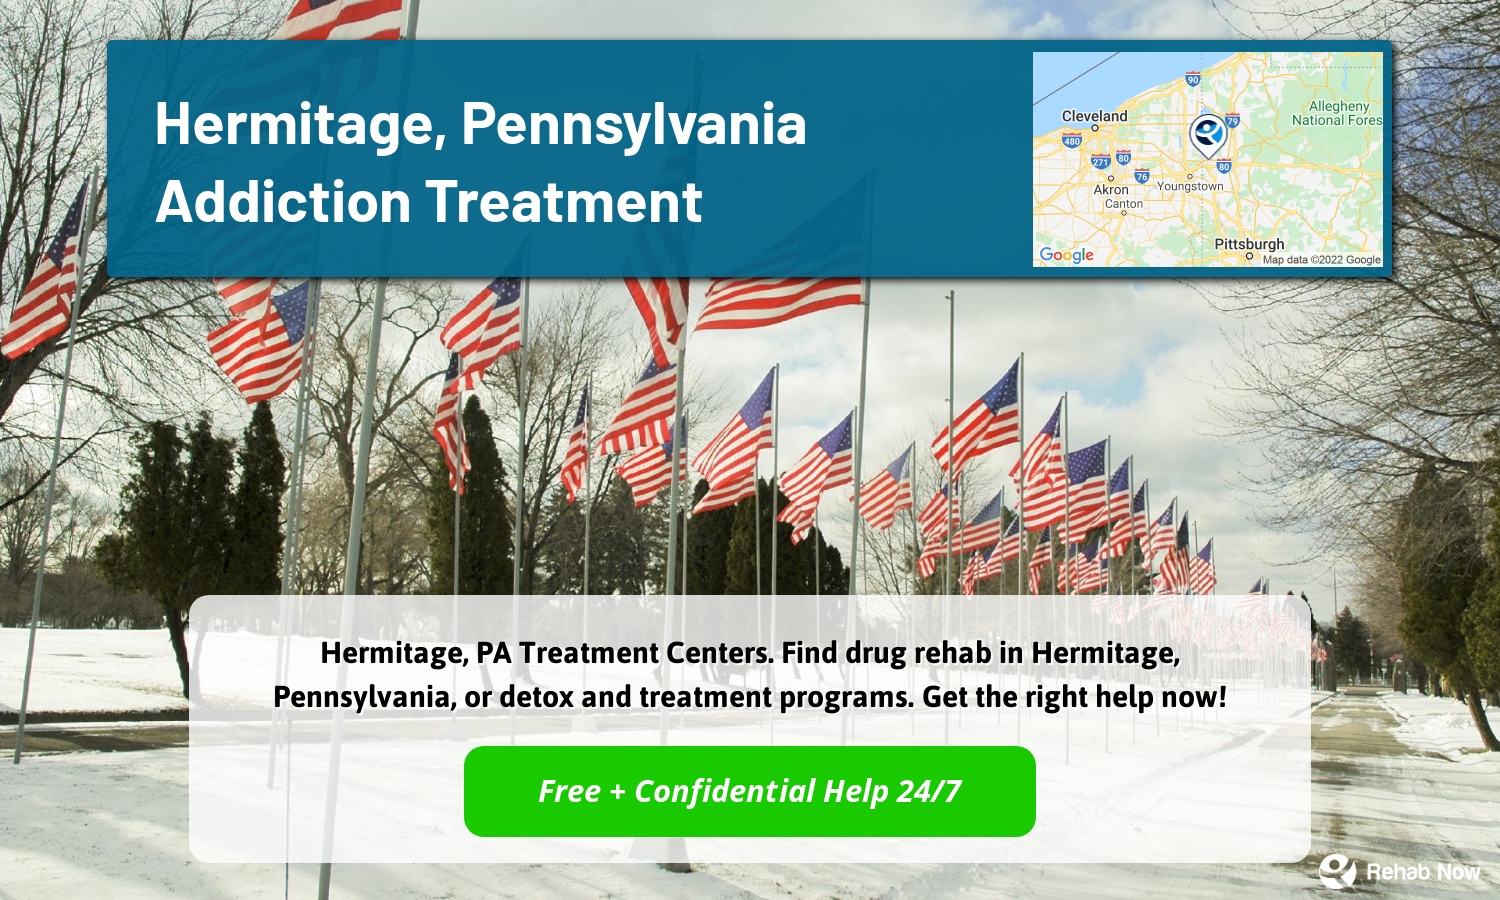 Hermitage, PA Treatment Centers. Find drug rehab in Hermitage, Pennsylvania, or detox and treatment programs. Get the right help now!